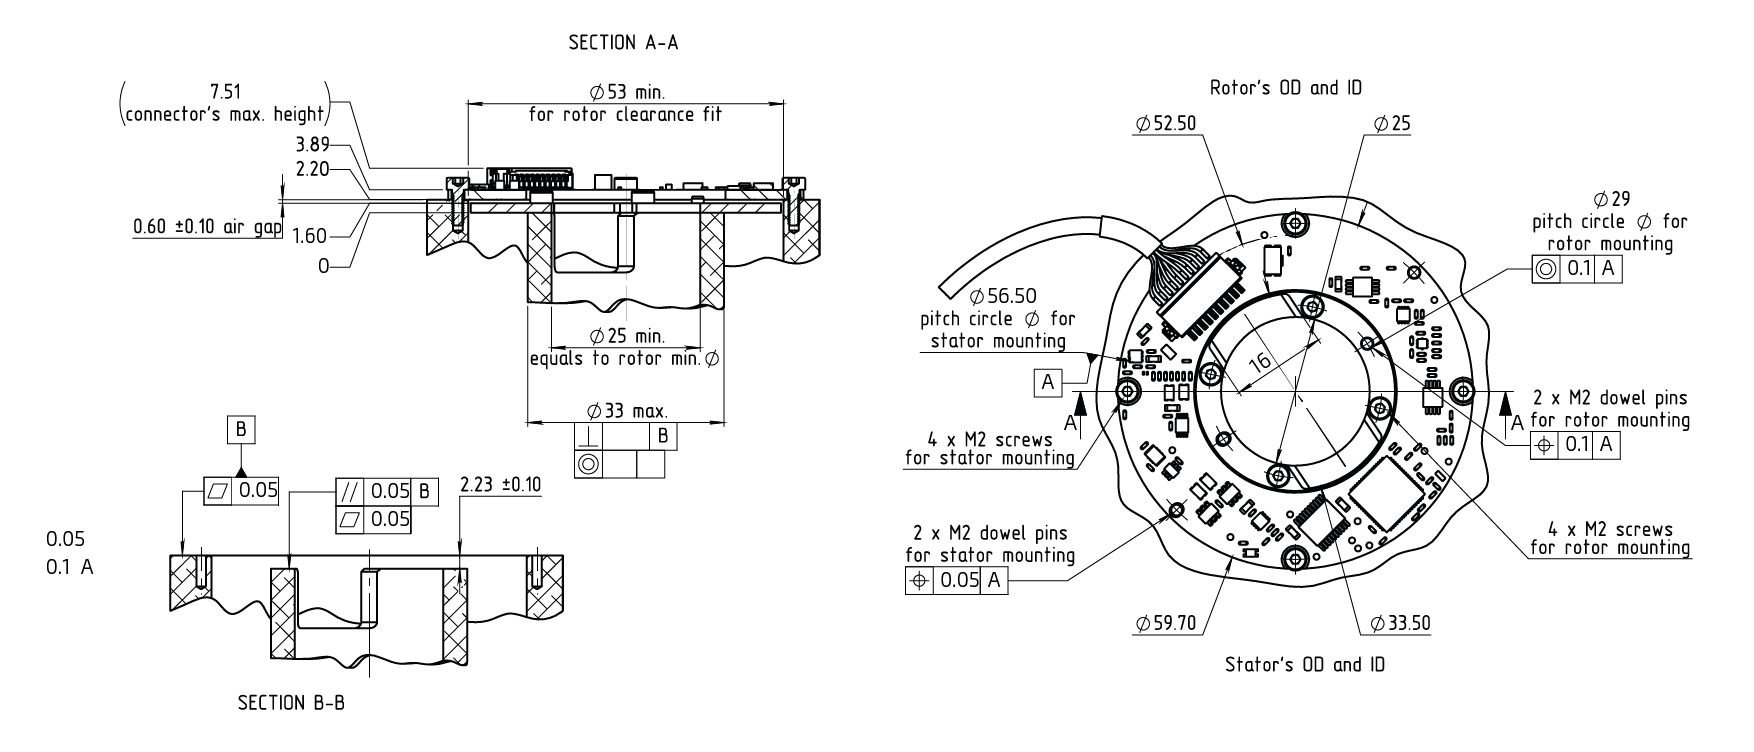 VLX-60 product drawing